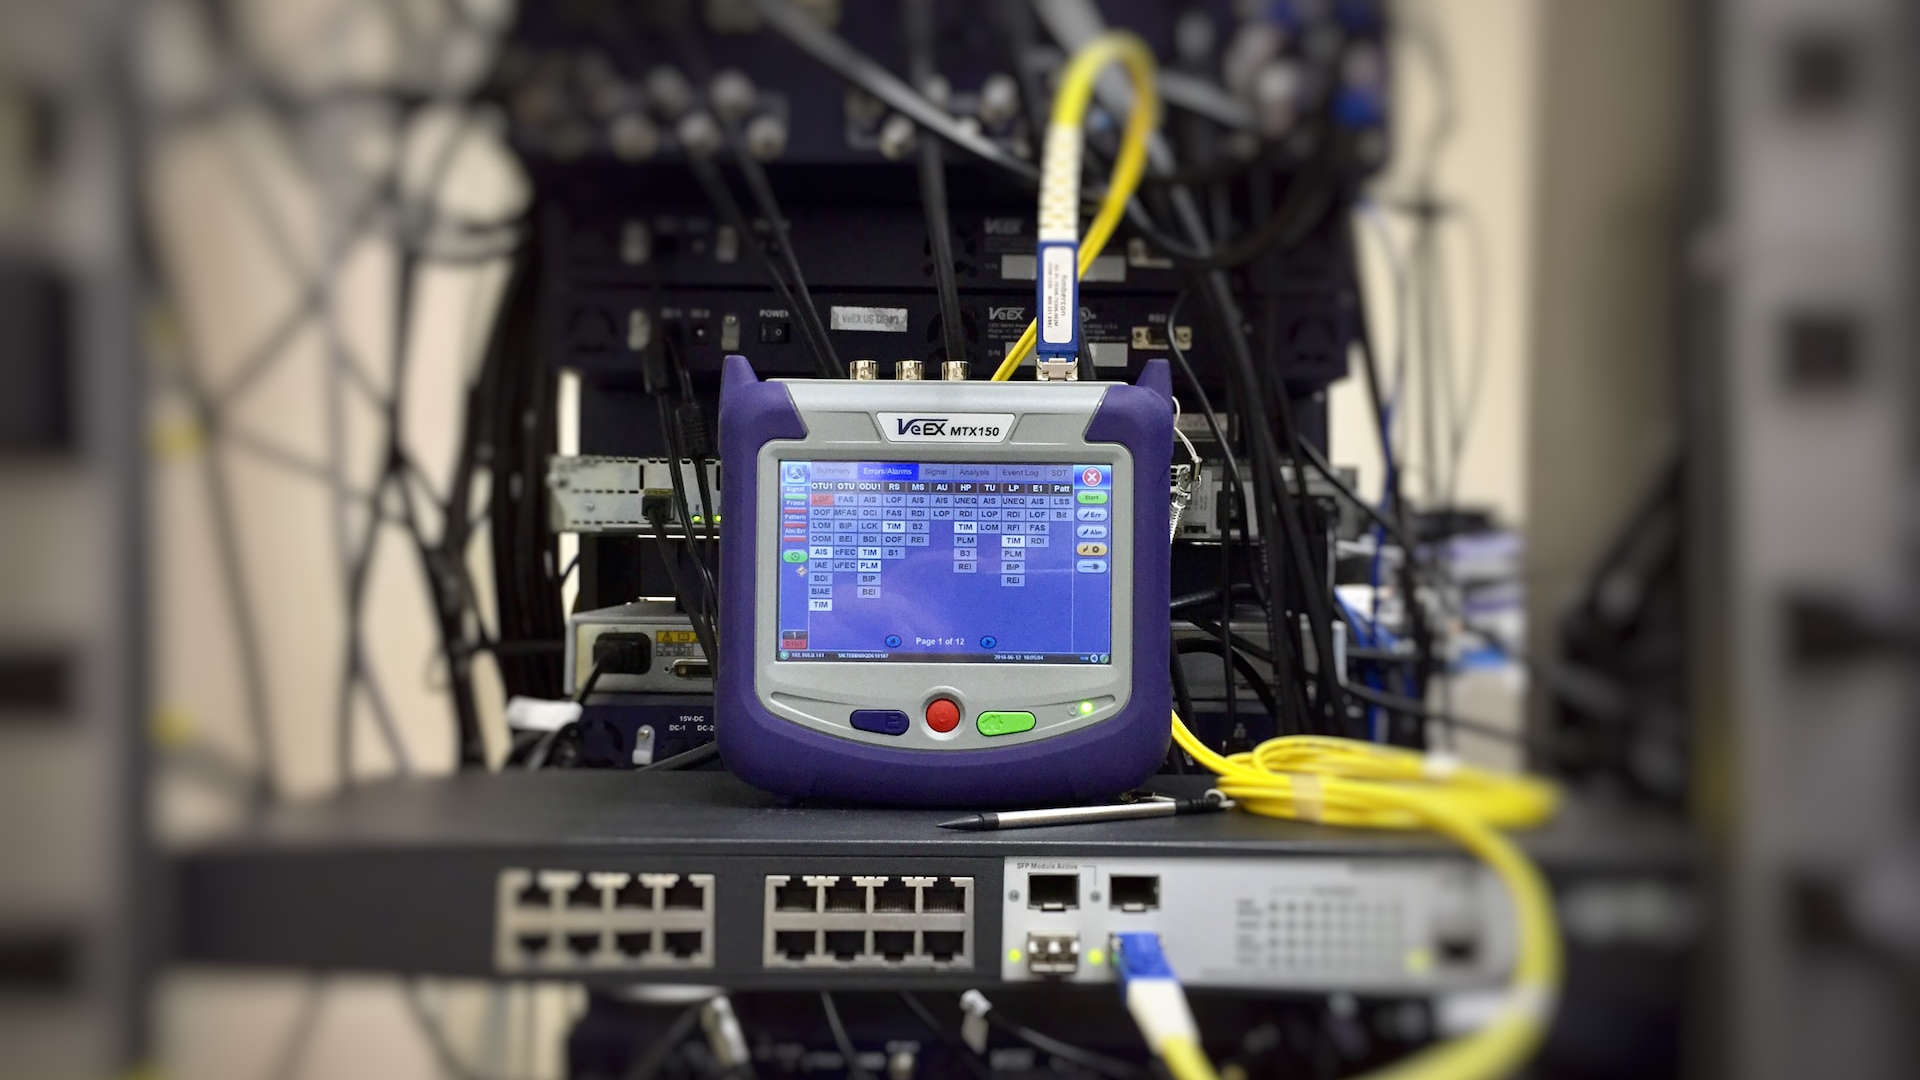 Network measuring device is on a network hub/switch.